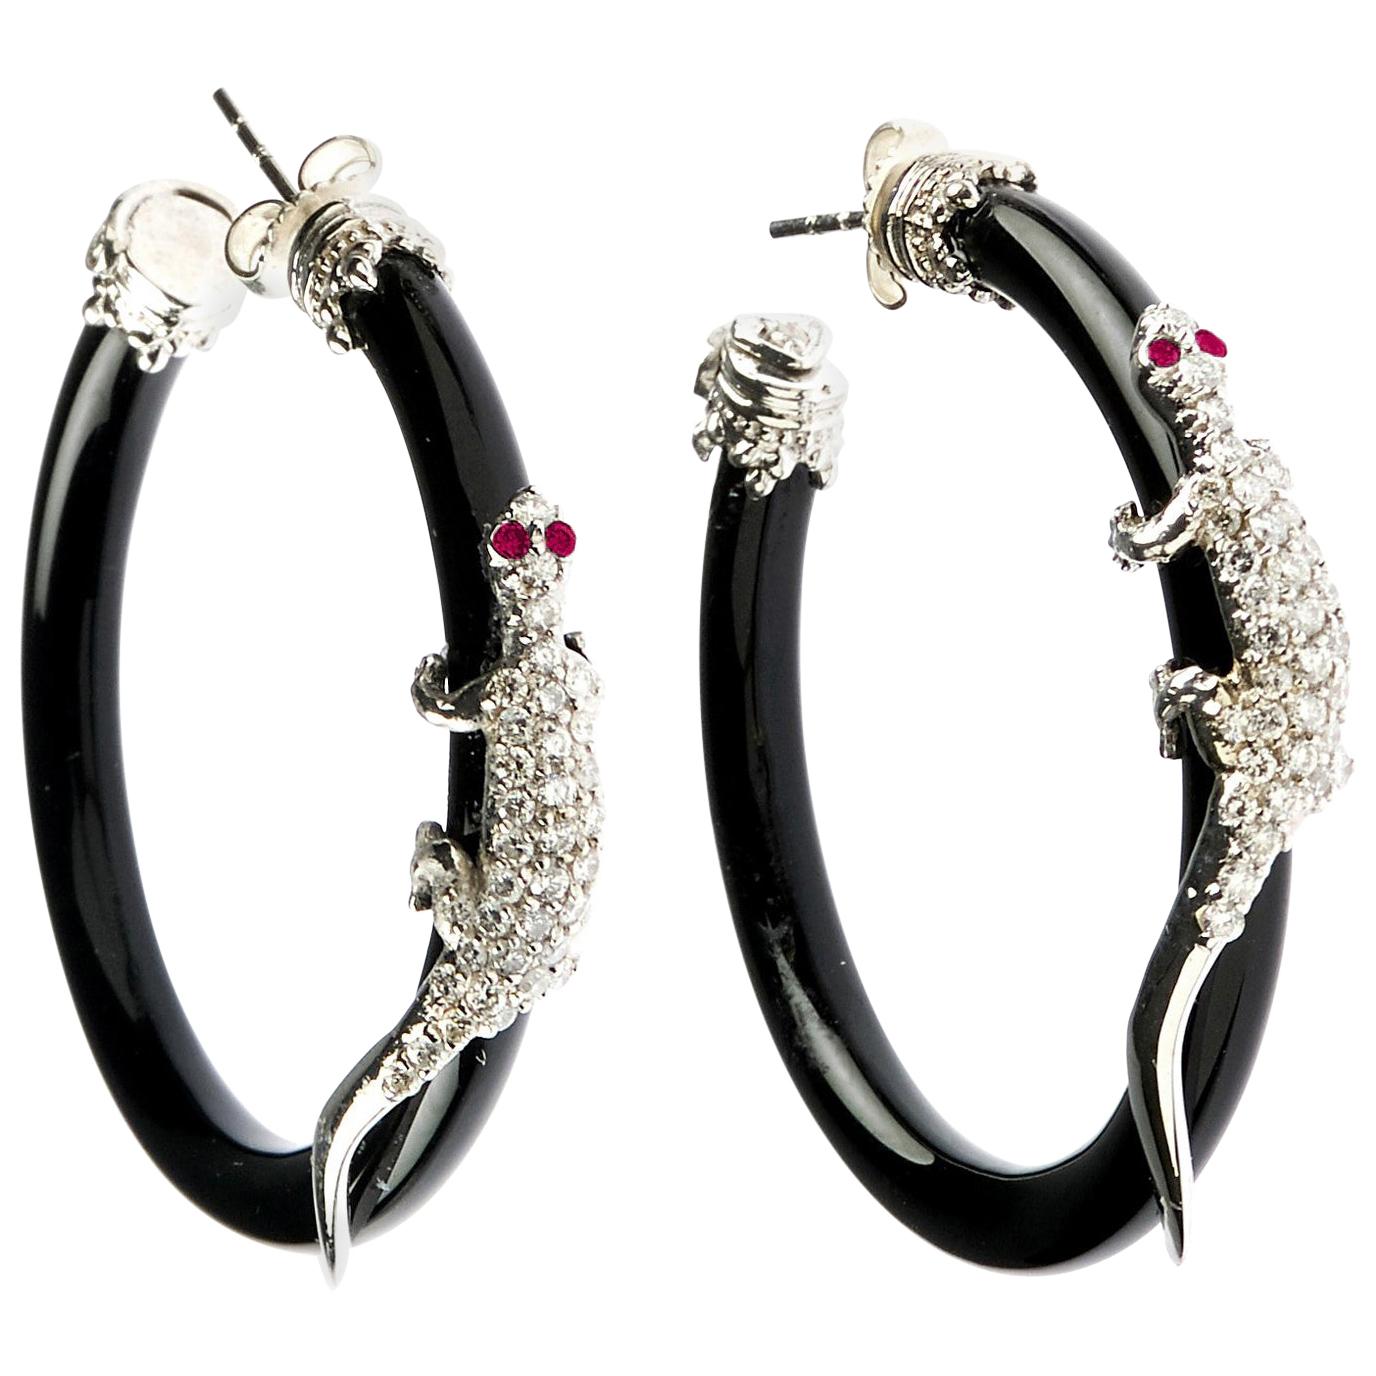 Stambolian White Gold Lizard Hoop Earrings with Onyx and Diamonds